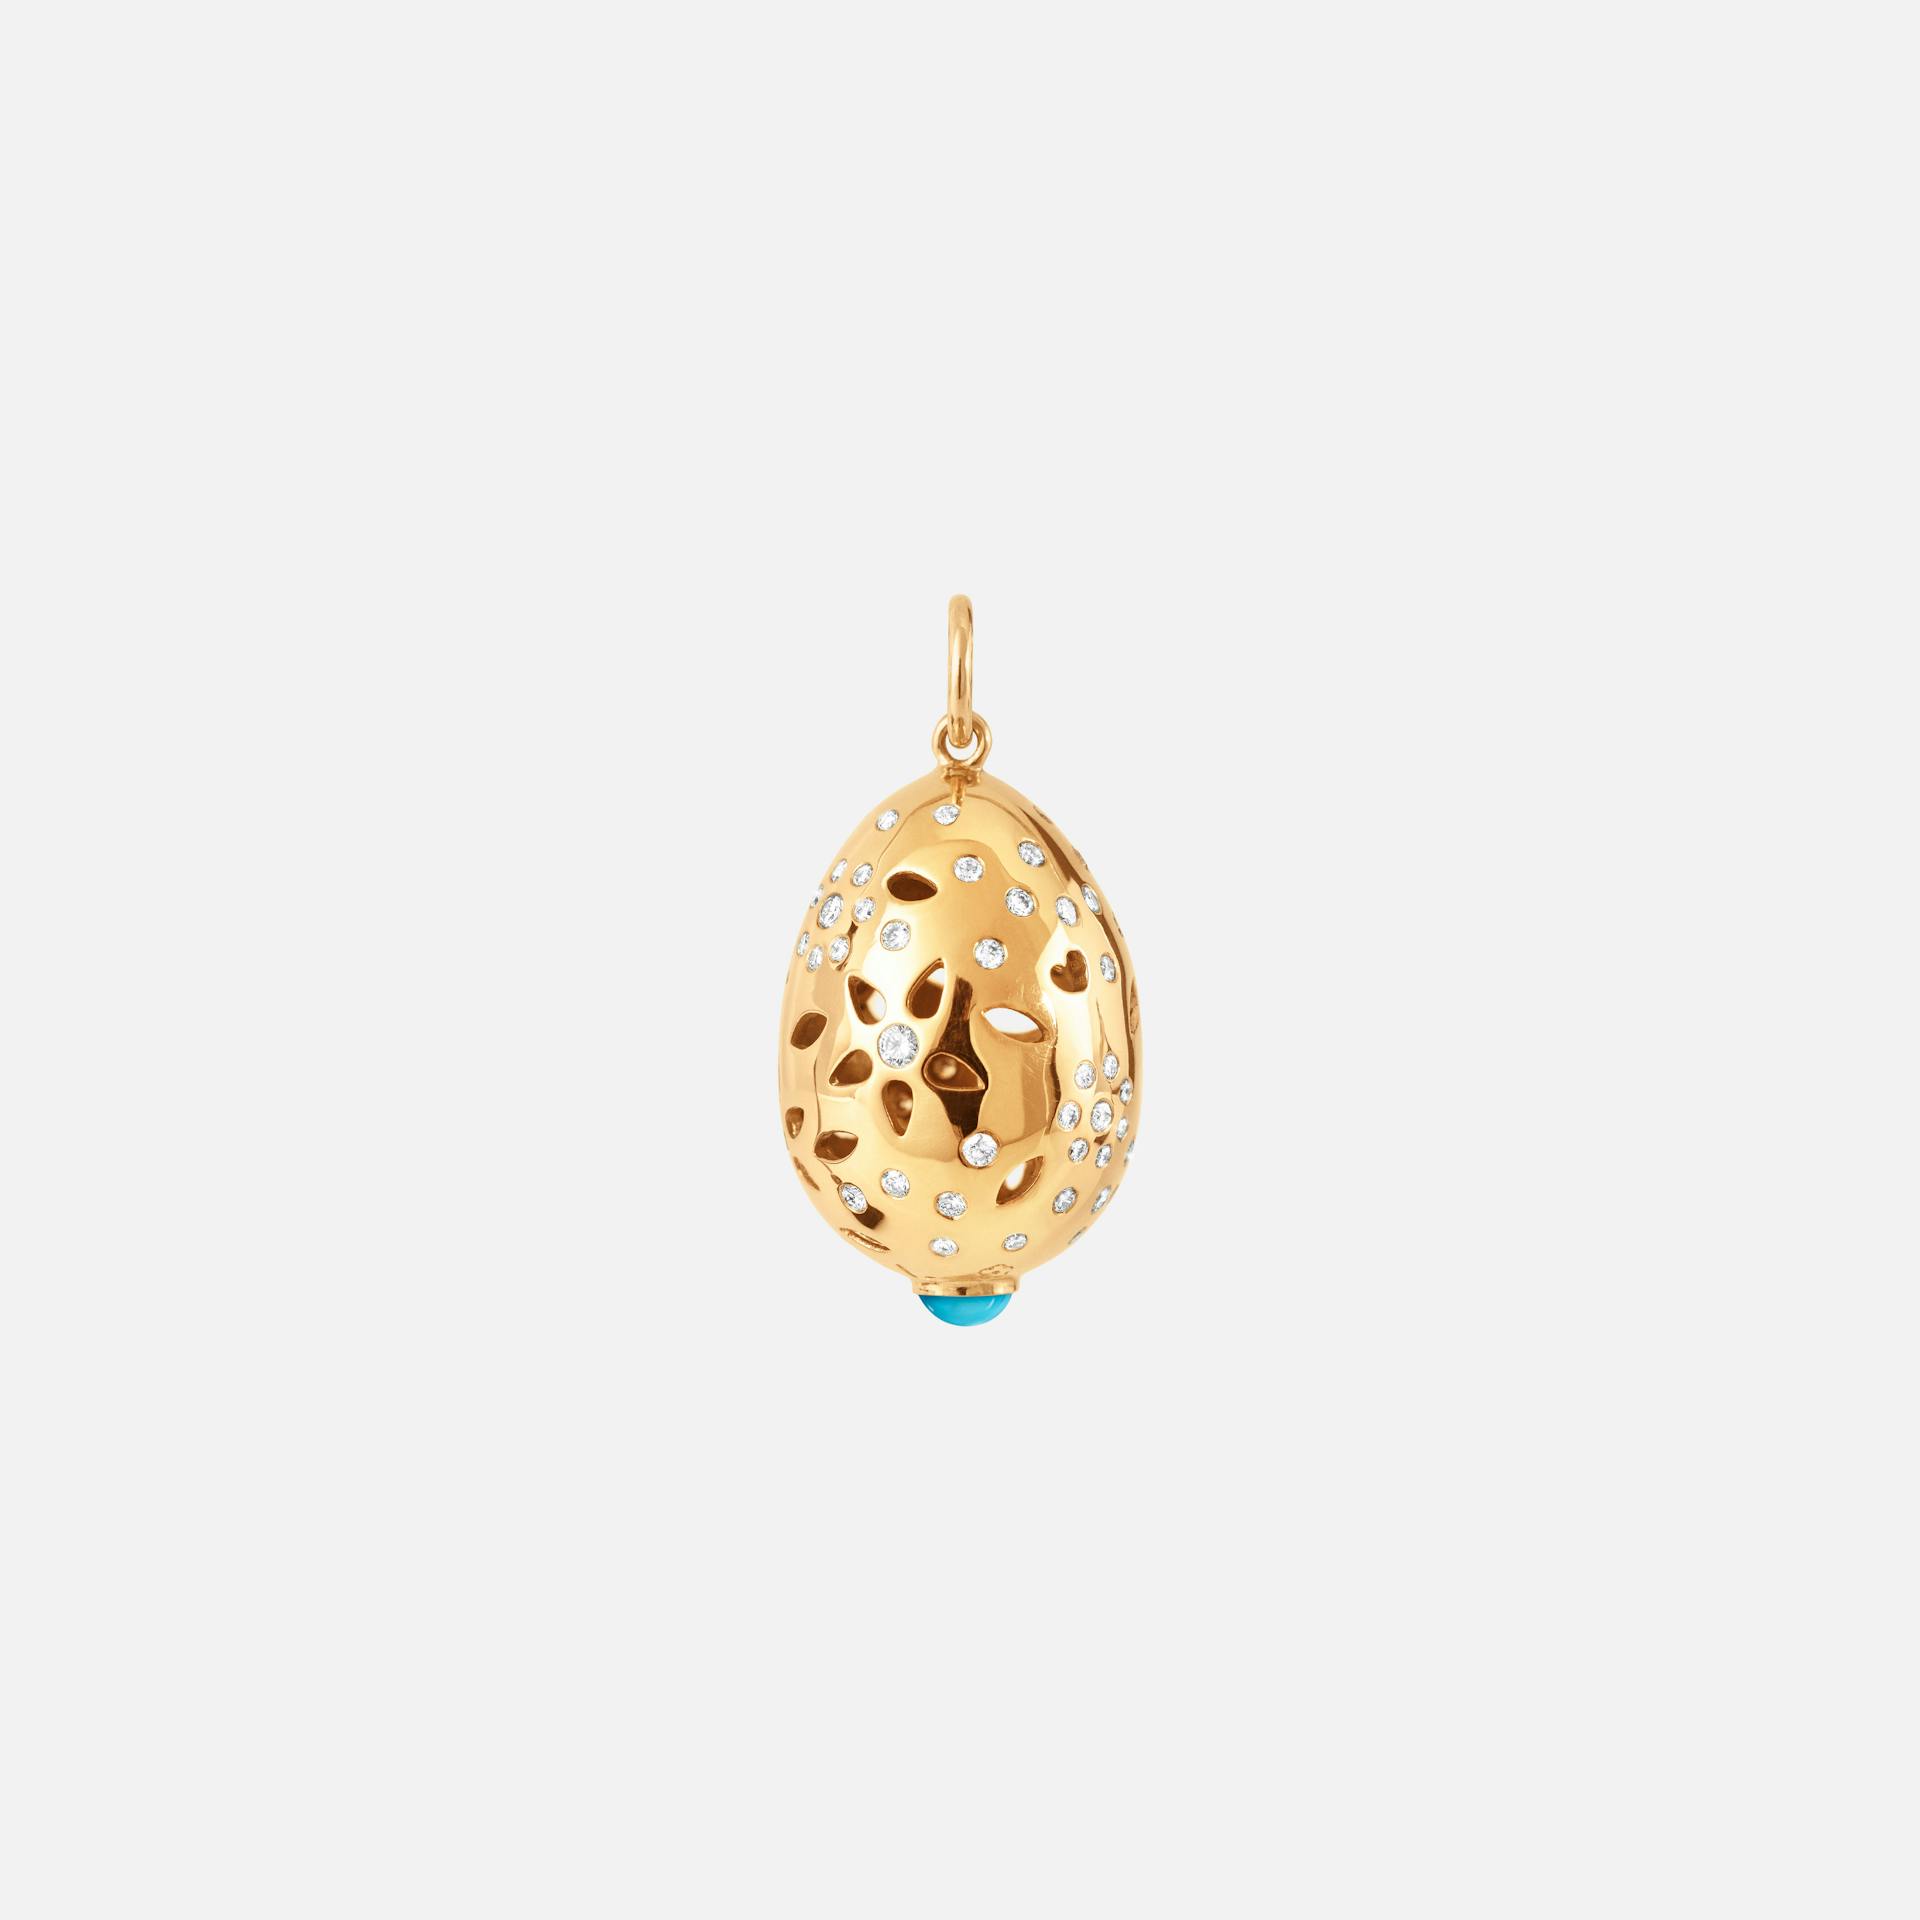 Lace Pendant in Yellow Gold with Diamonds & Turquoise   |  Ole Lynggaard Copenhagen